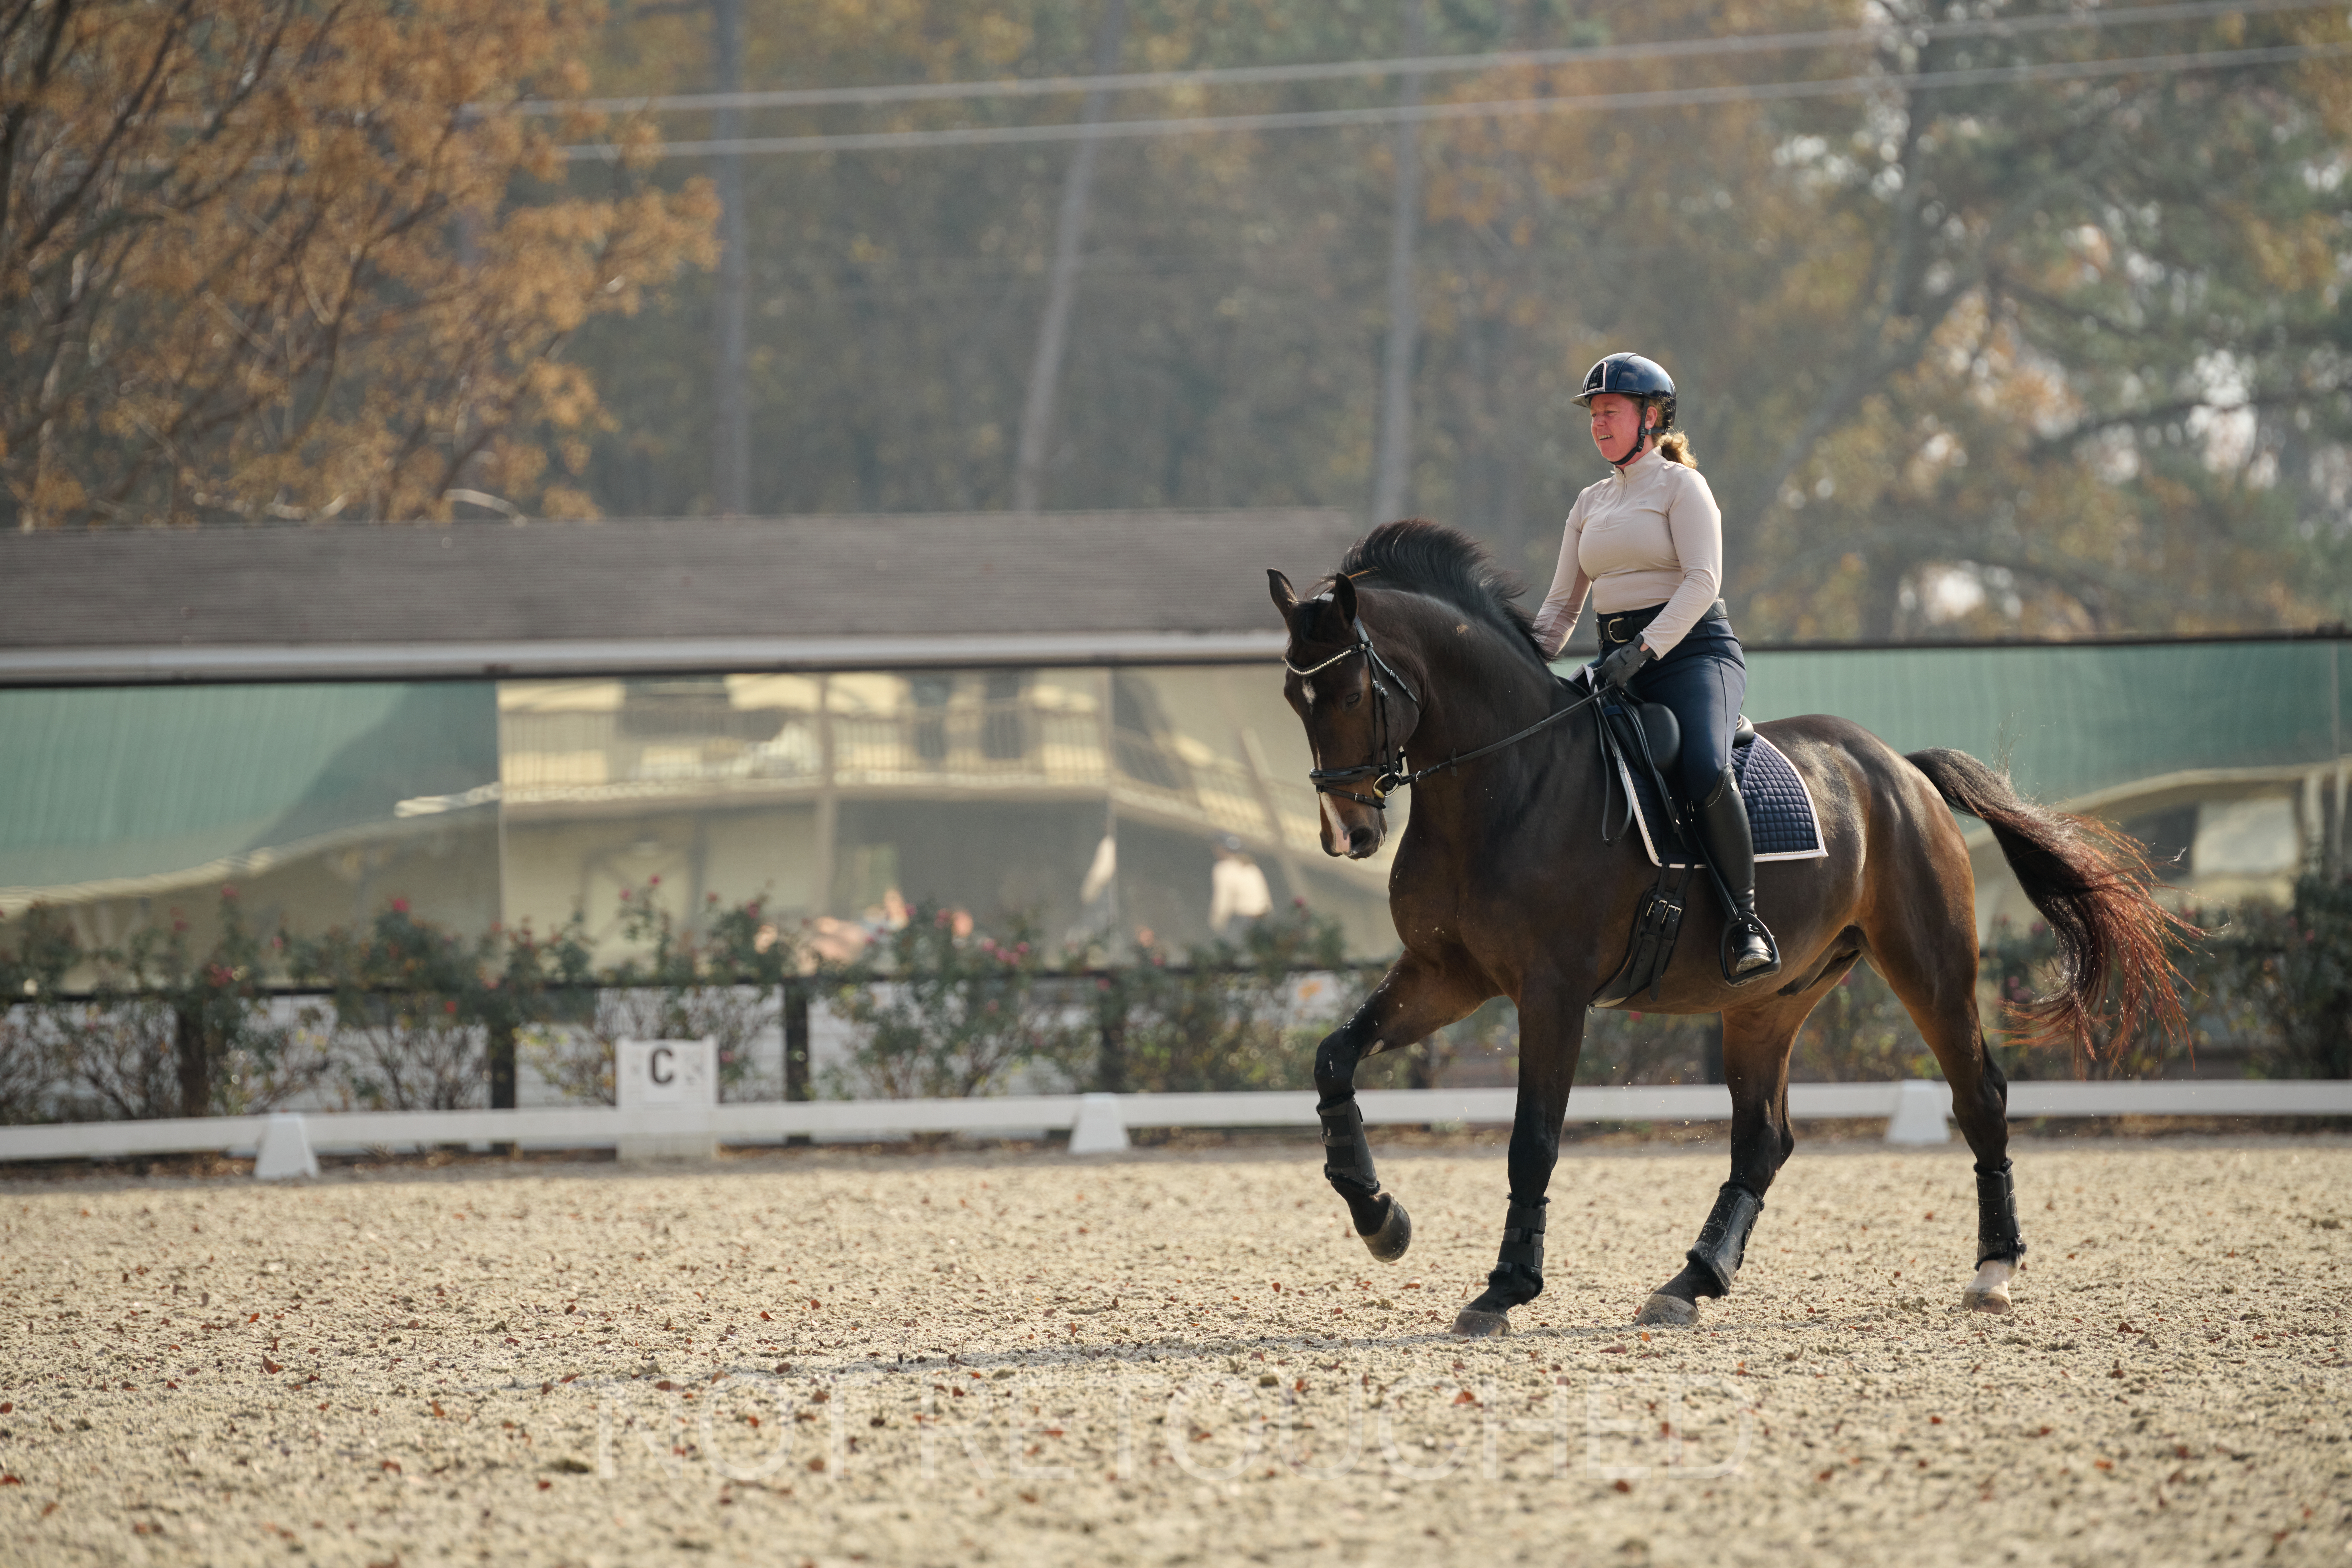 Dressage horse and rider cantering in a riding arena